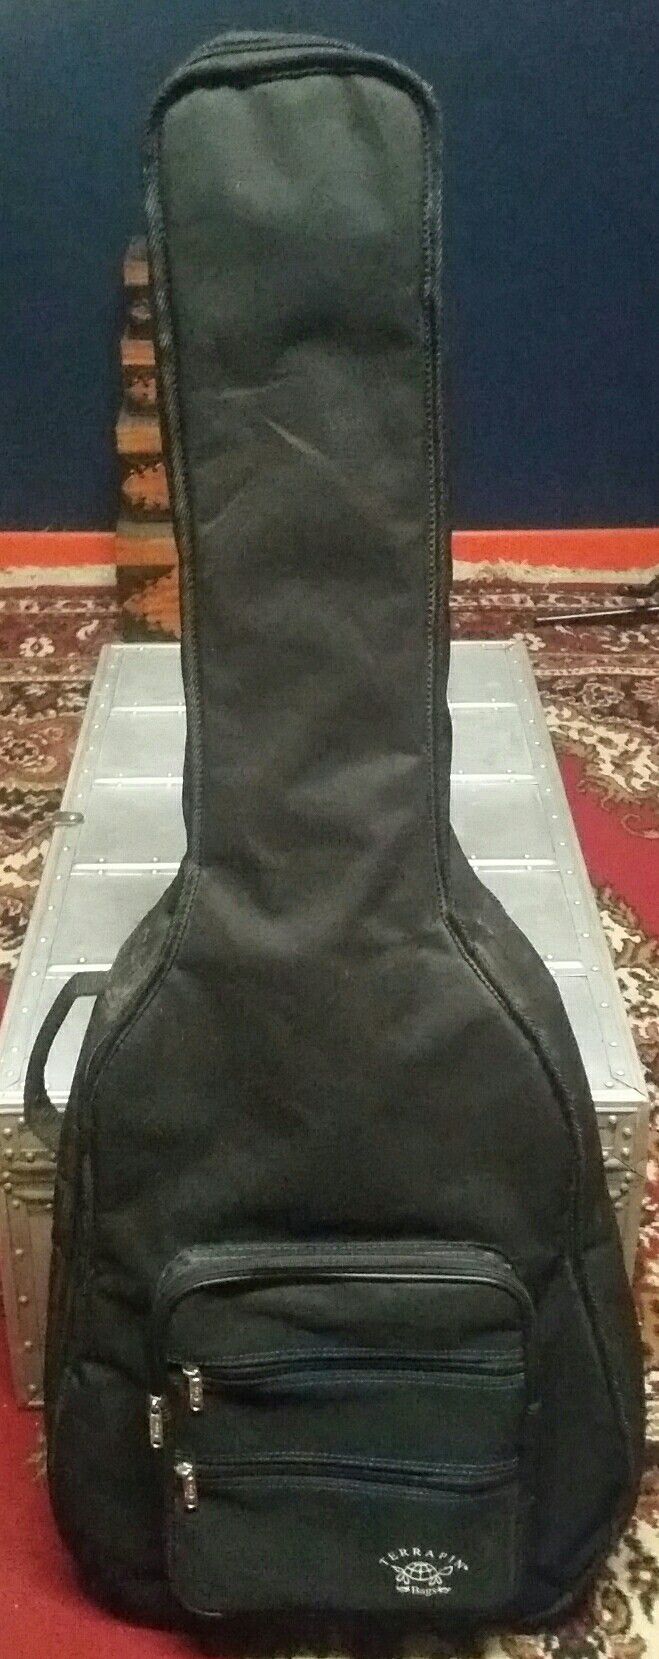 Terrapin Deluxe Padded Gig Bag for Acoustic Guitar Dreadnought